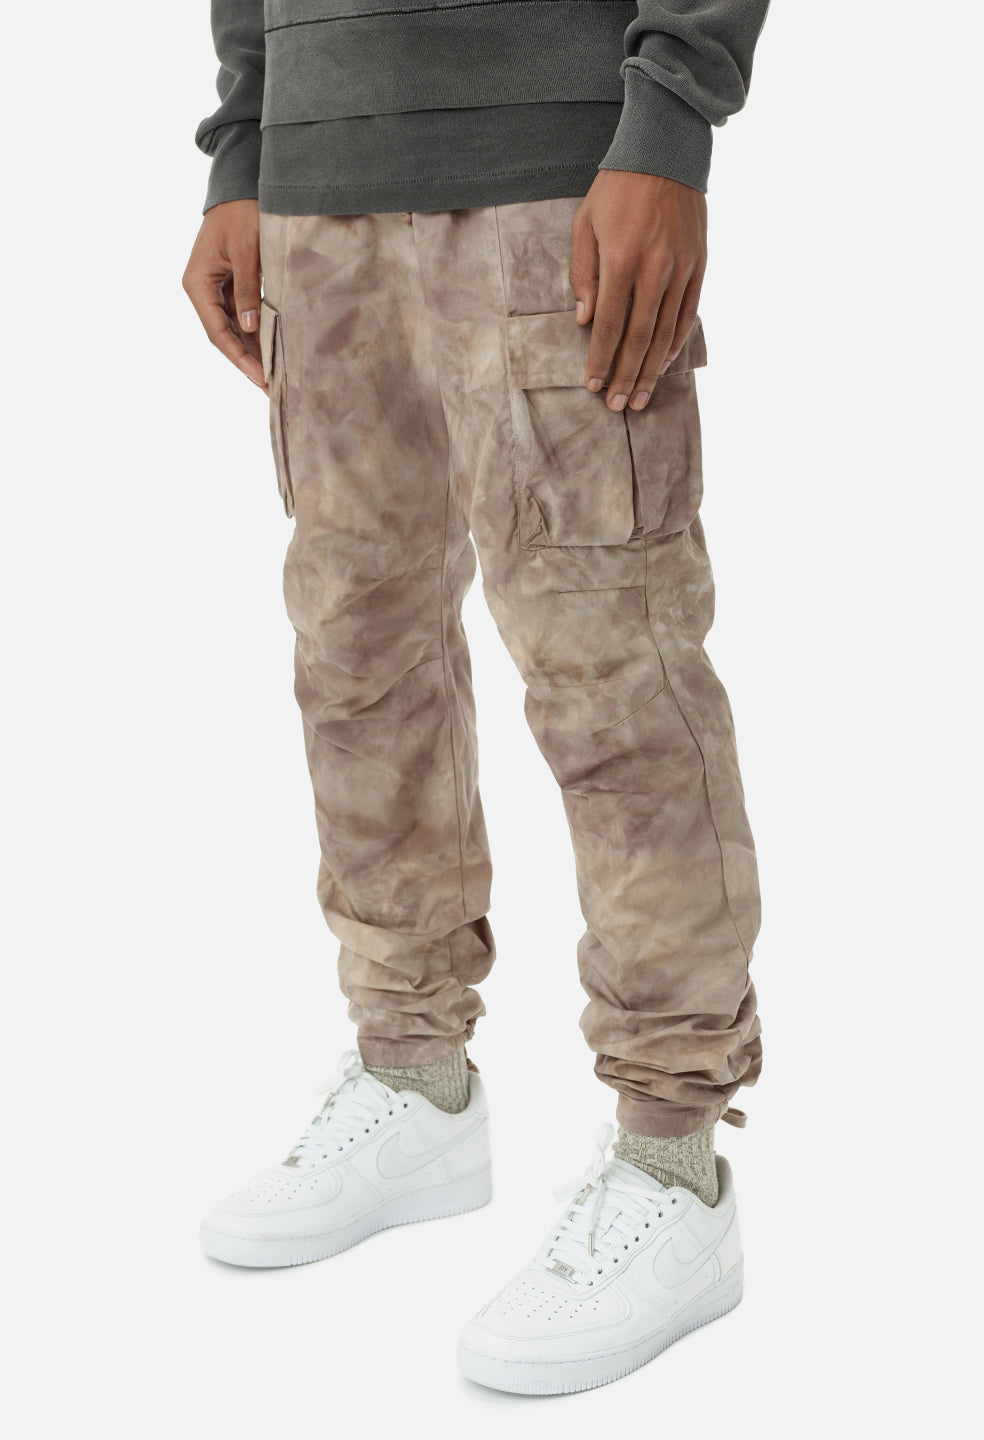 cargo pants with sneakers